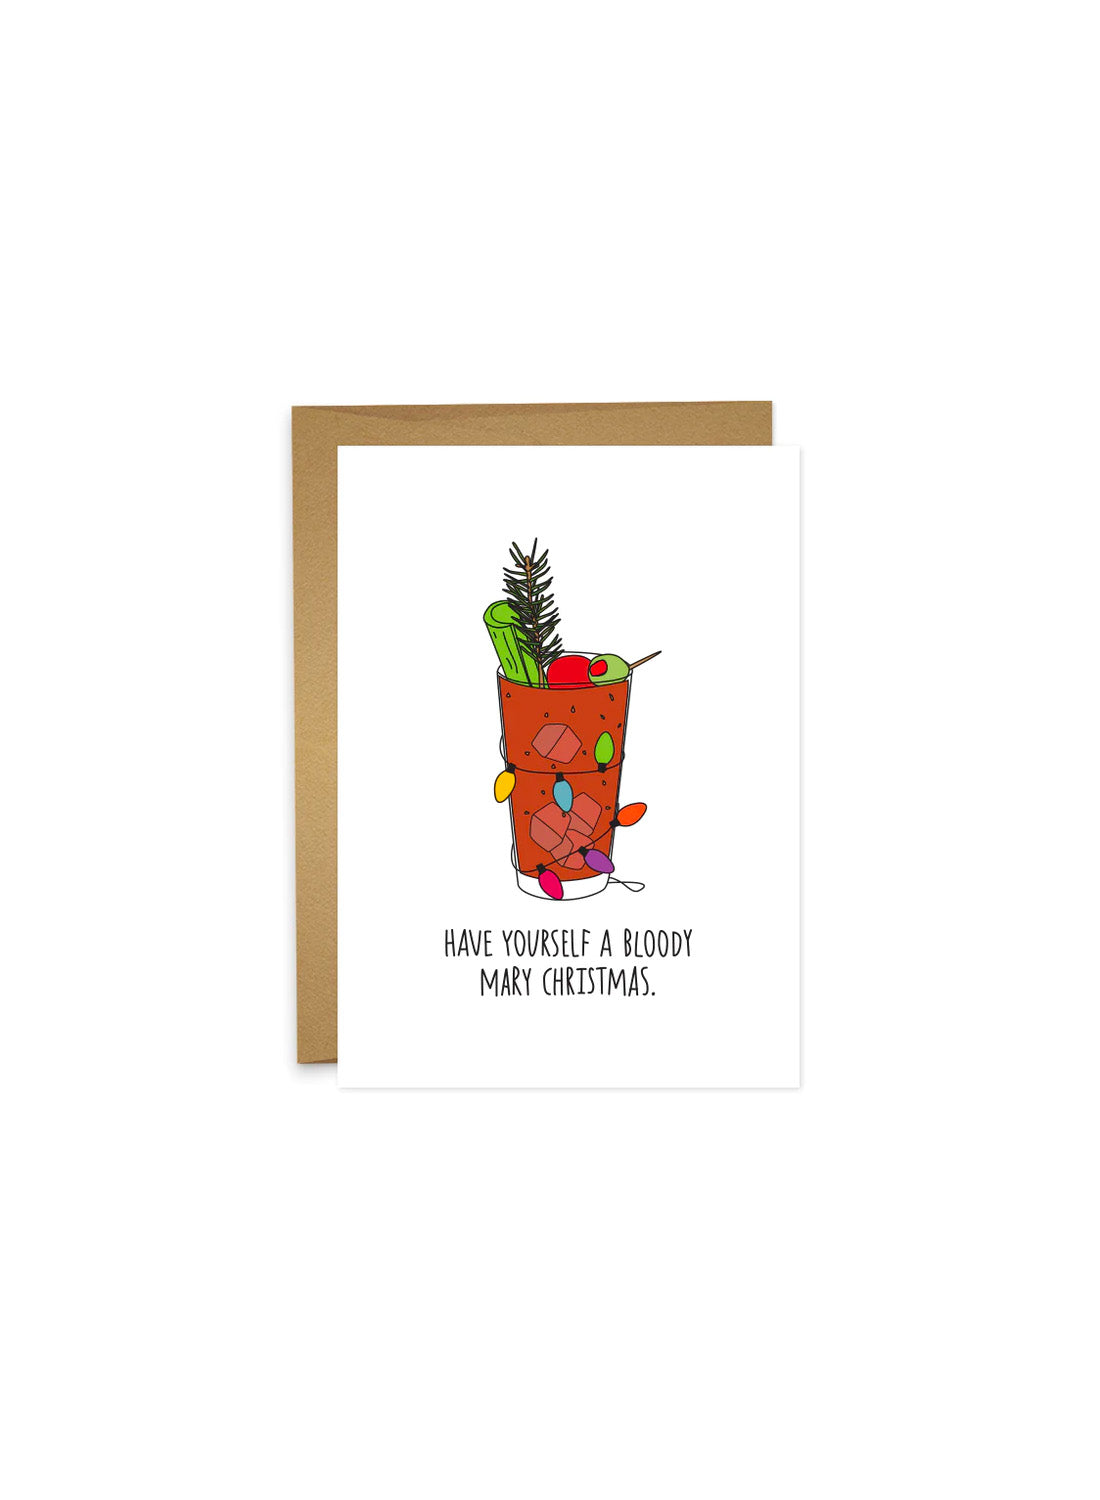 Bloody Mary Christmas Greeting Card